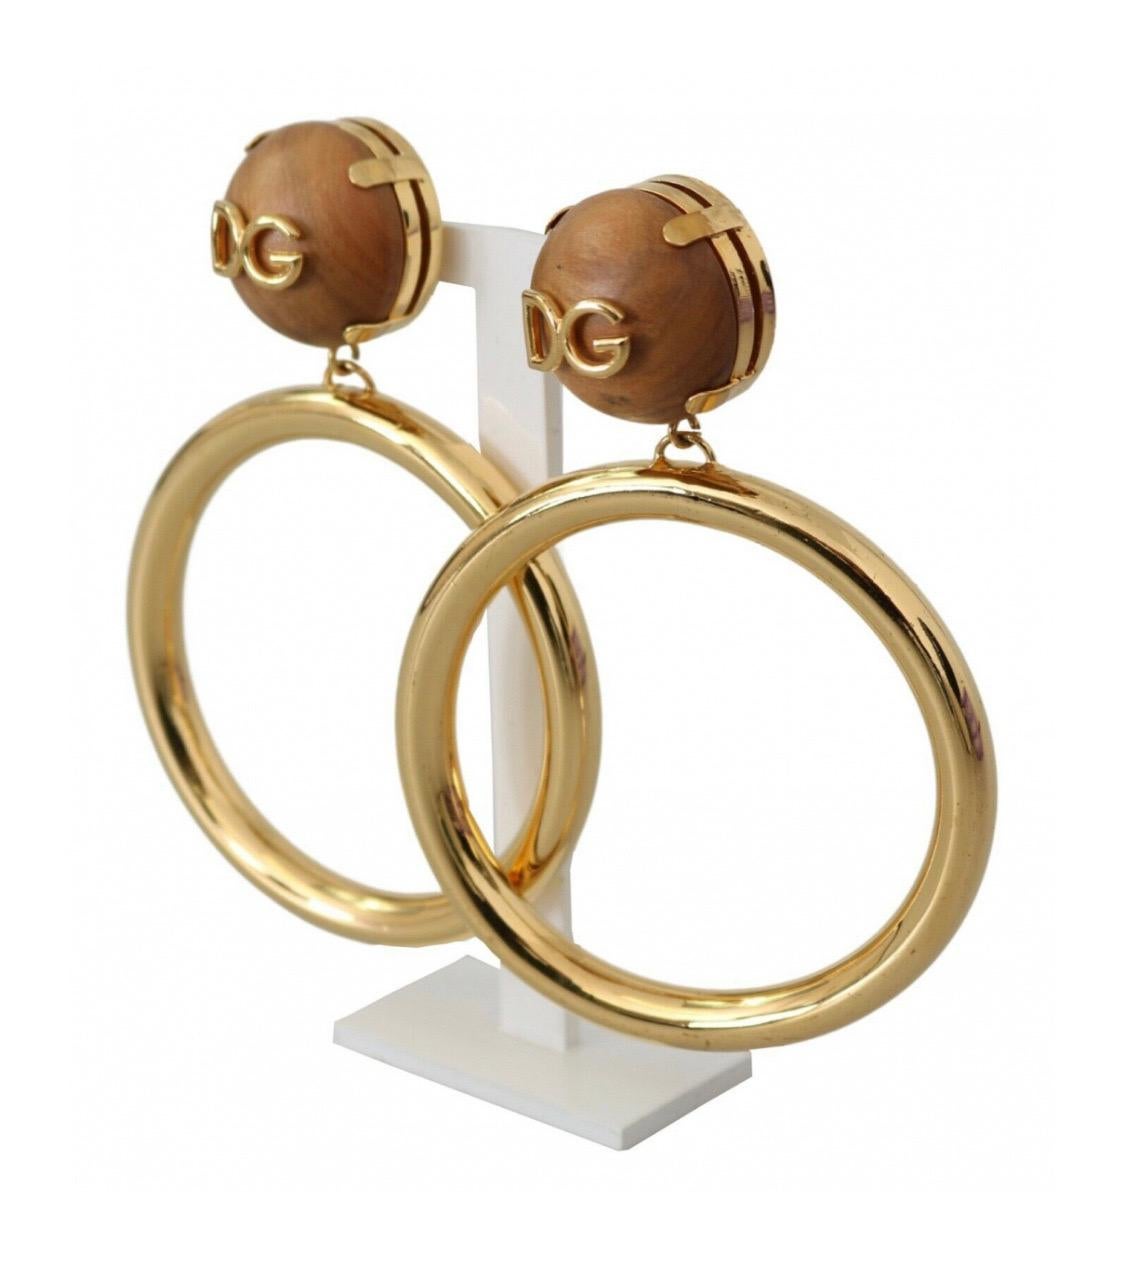 Dolce & Gabbana gold brass
hoop earrings with wooden clip on 2